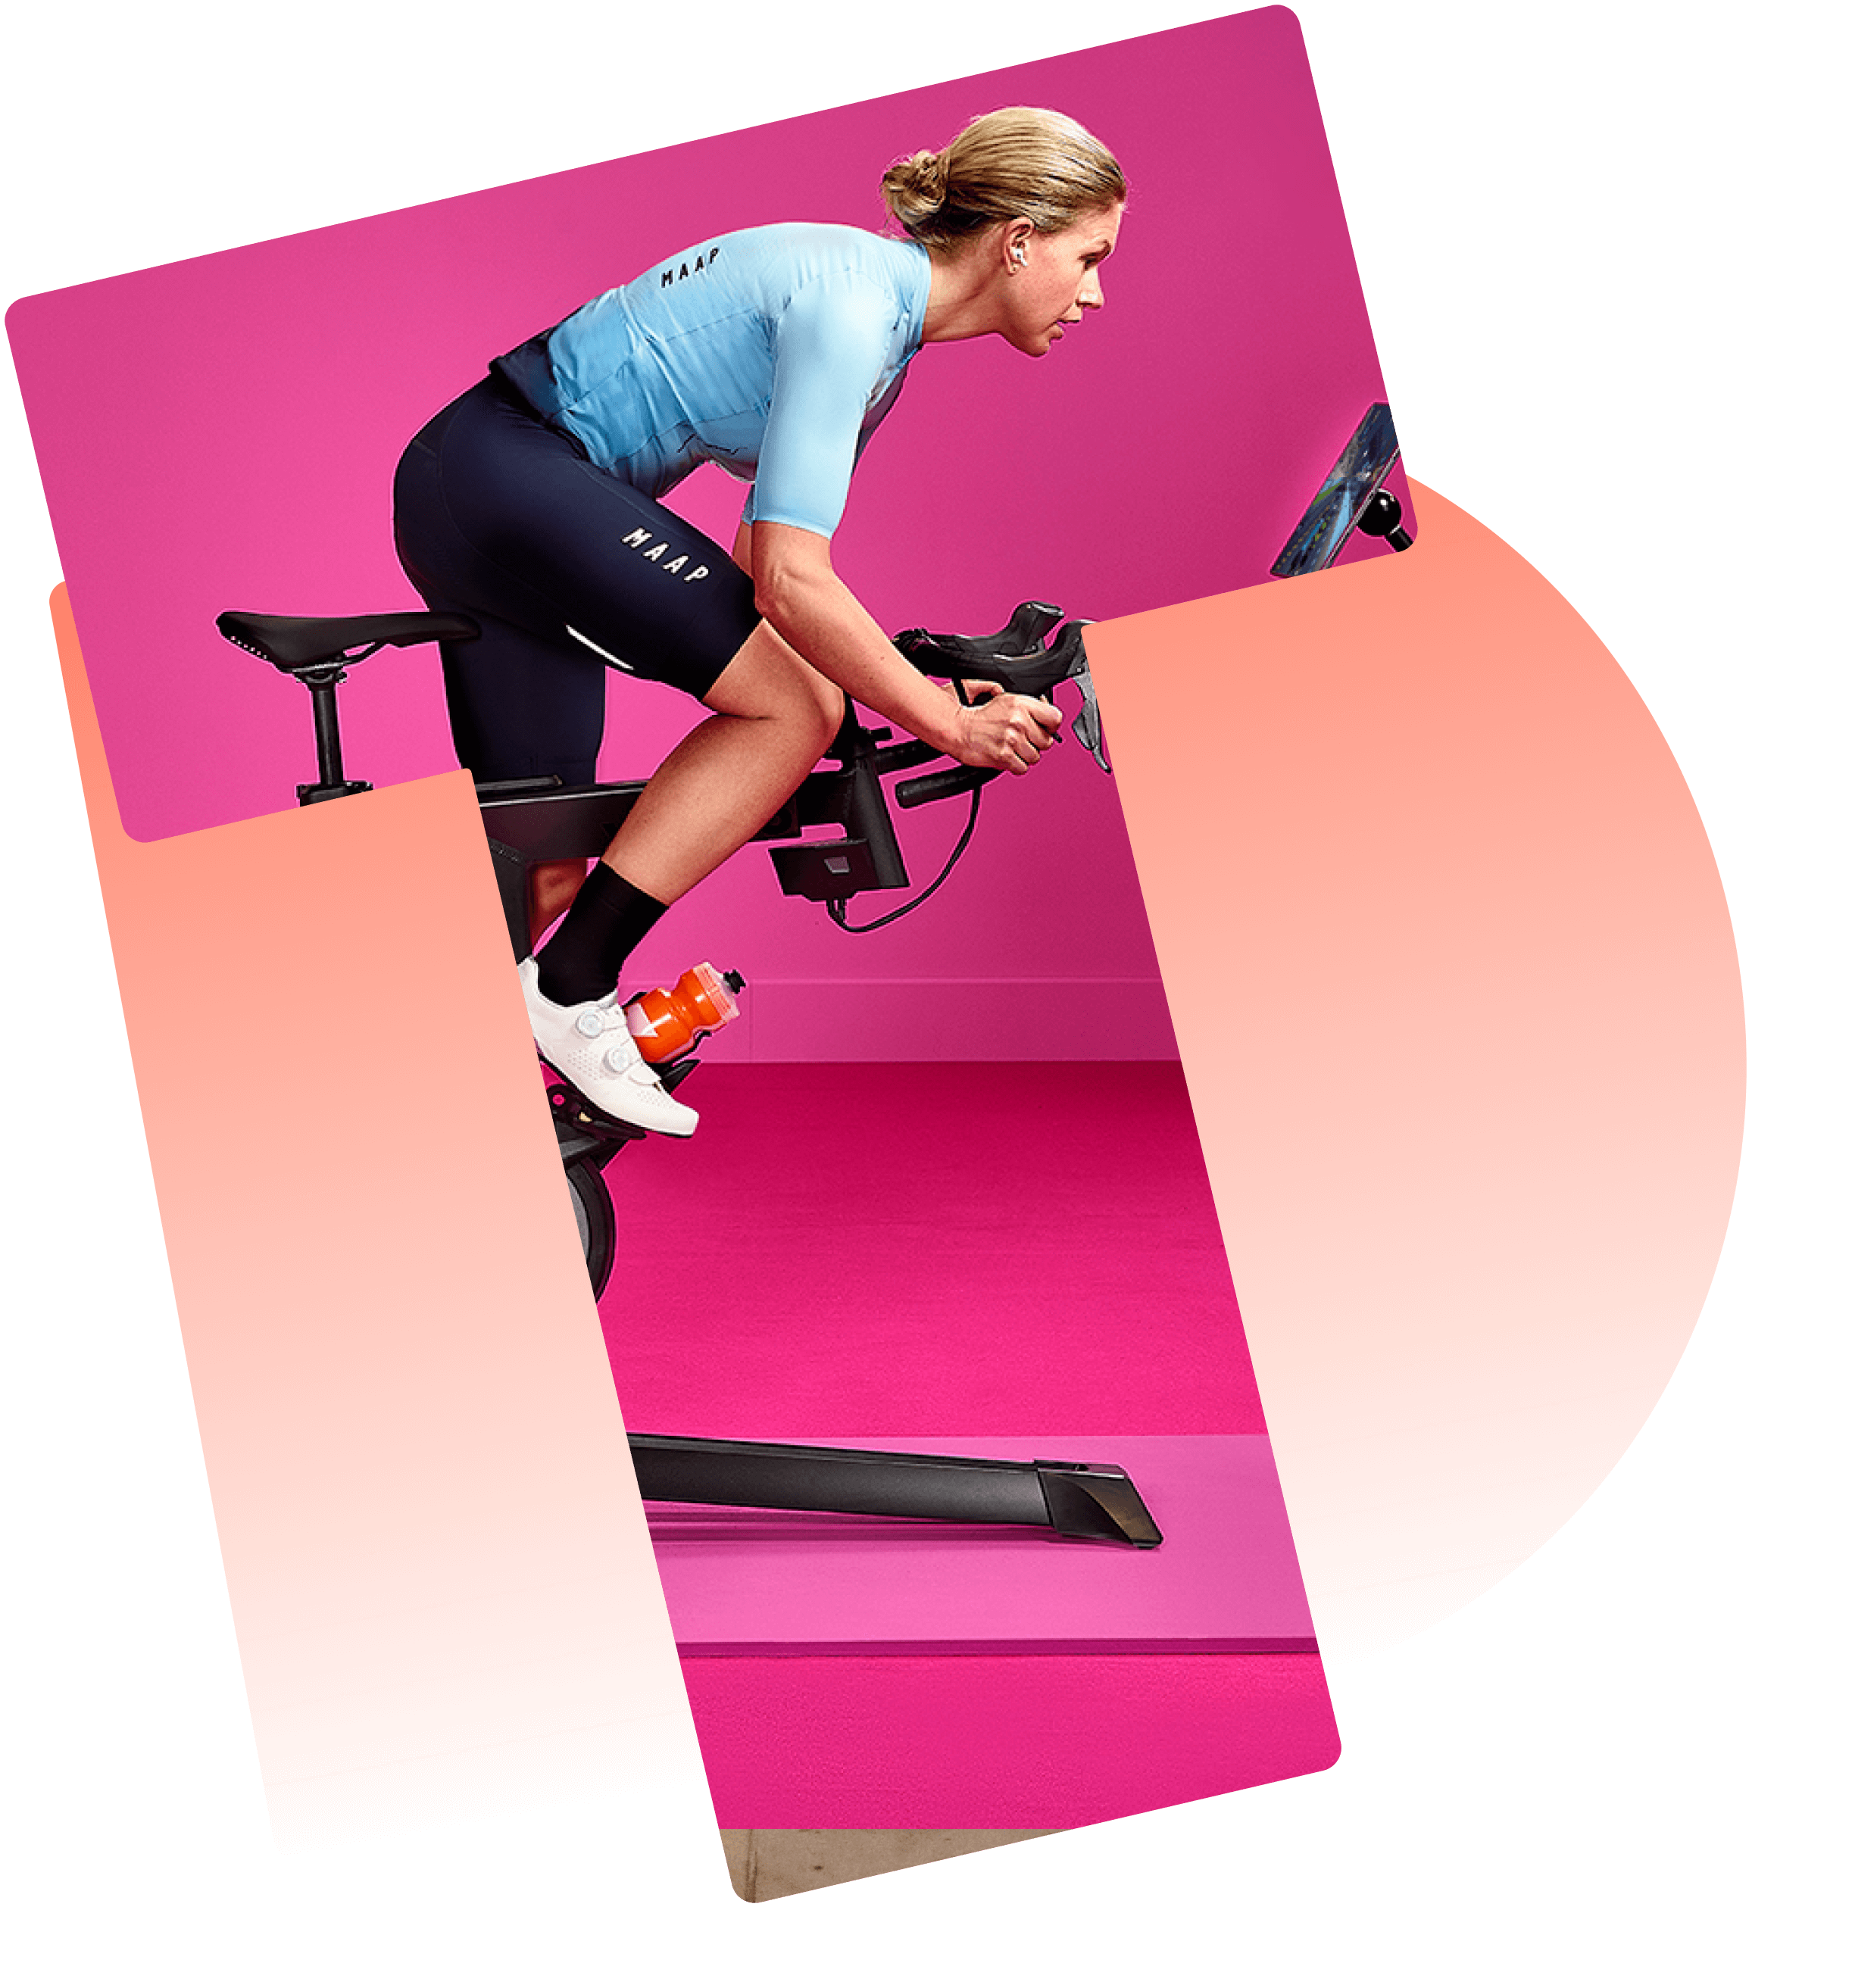 A women on an exercise bike